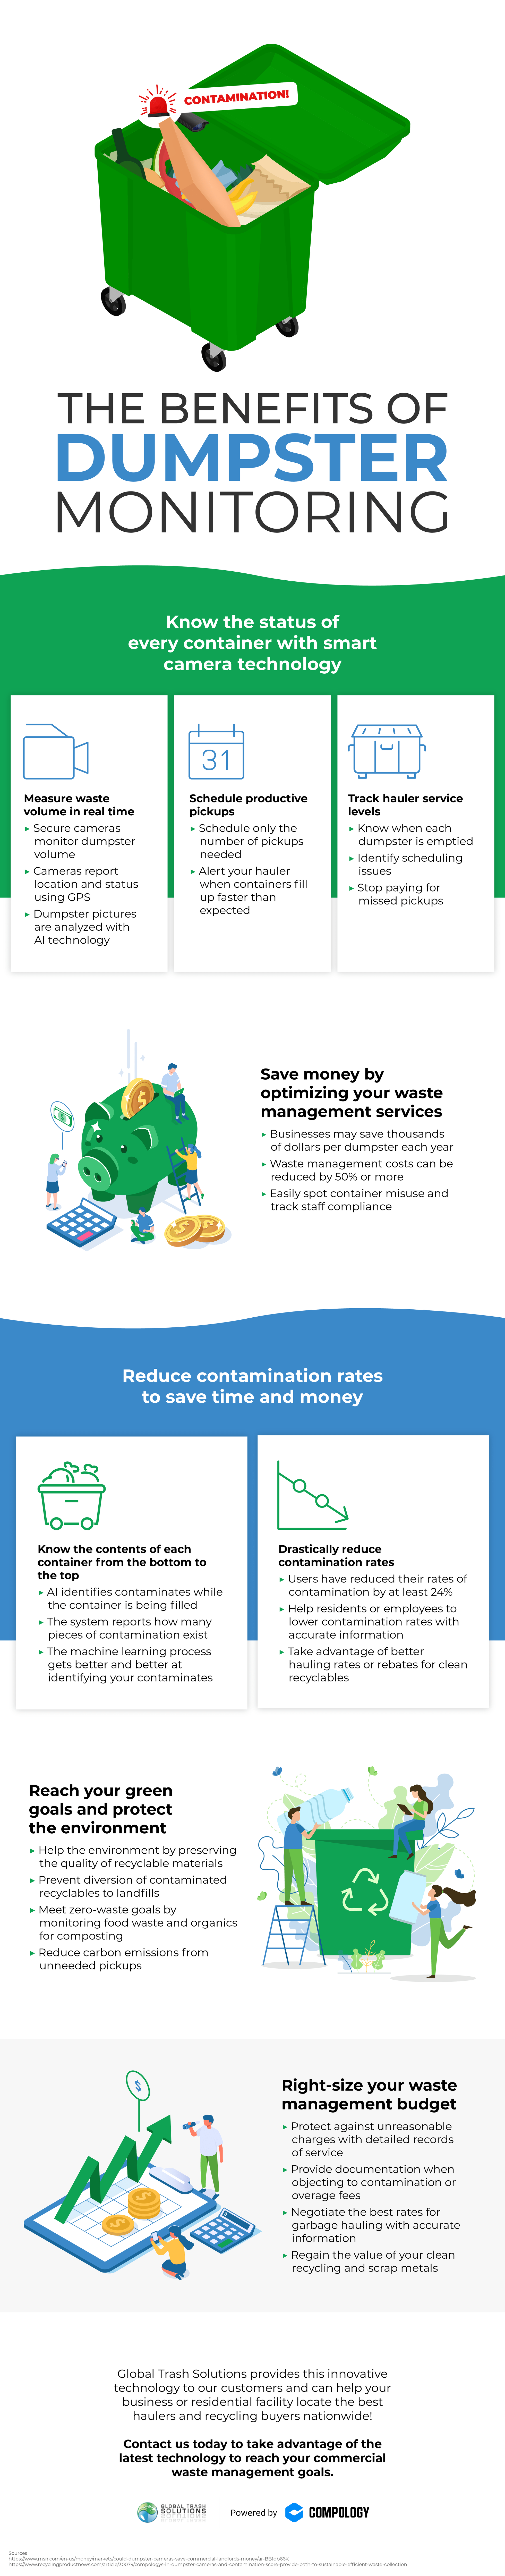 The benefits of dumpster monitoring infographic